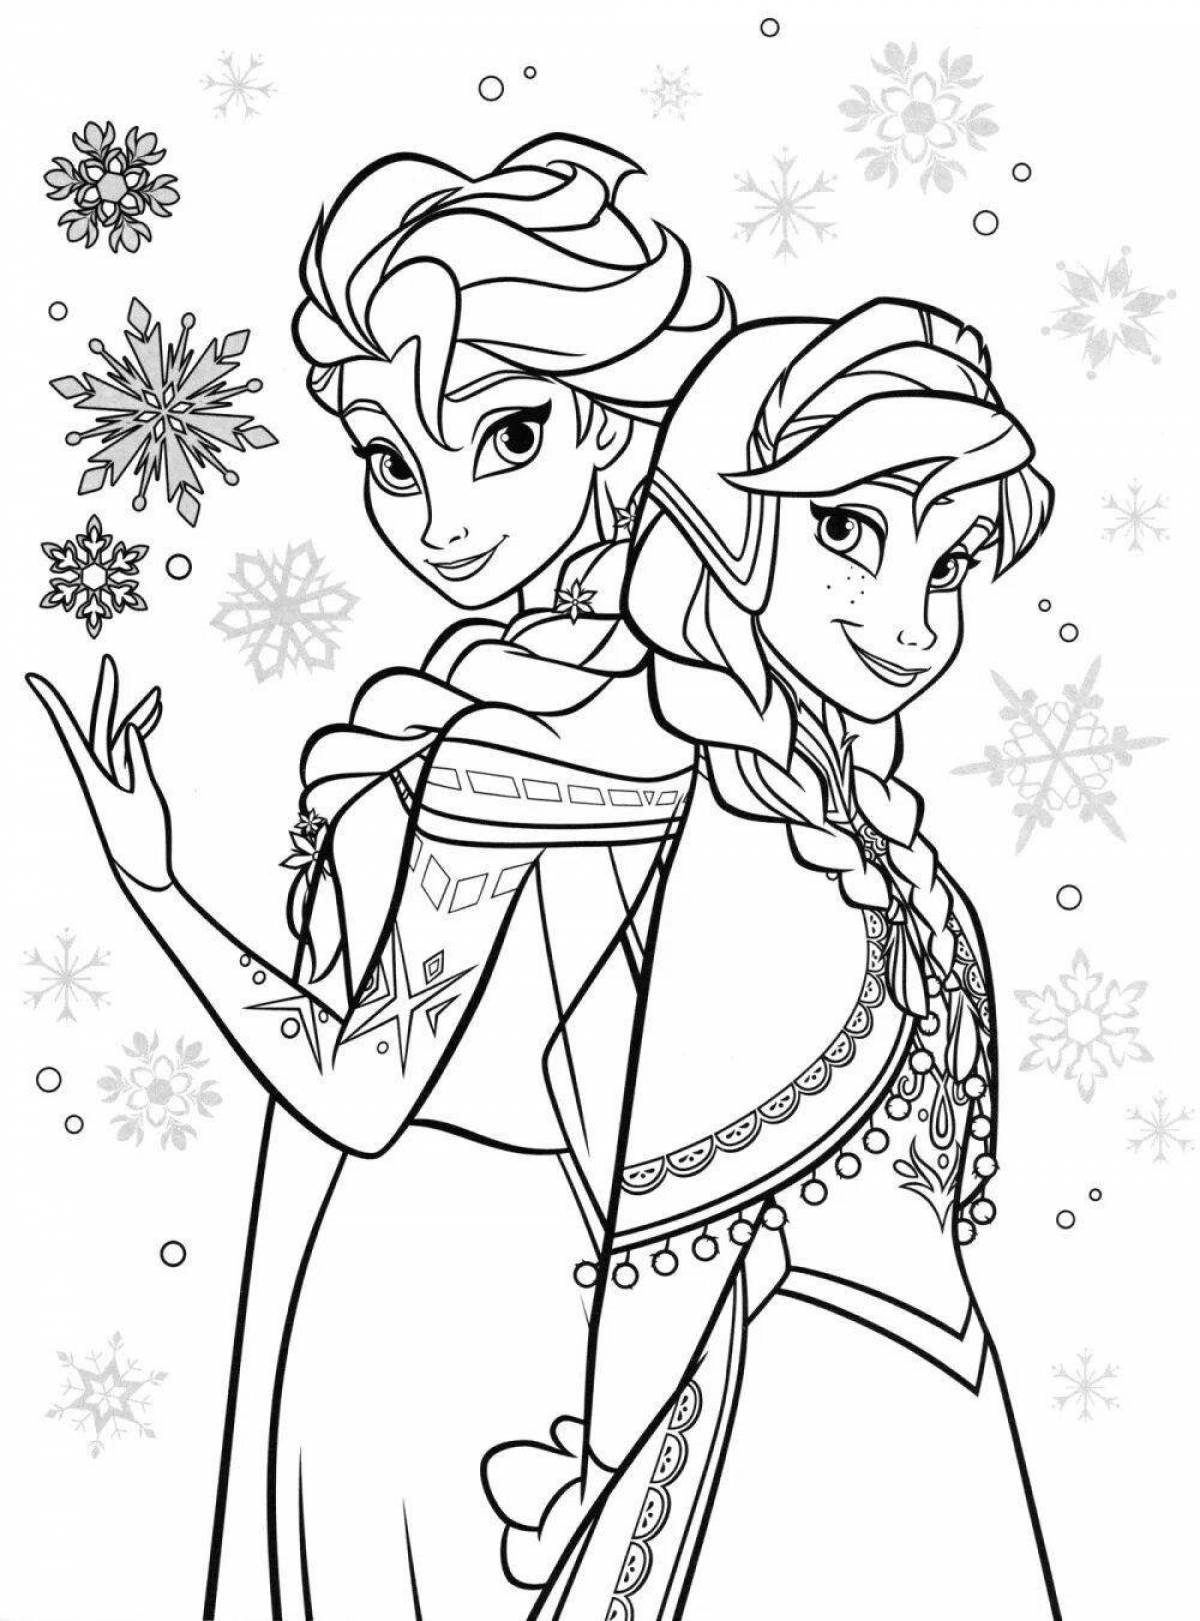 Elsa and anna fairytale coloring book